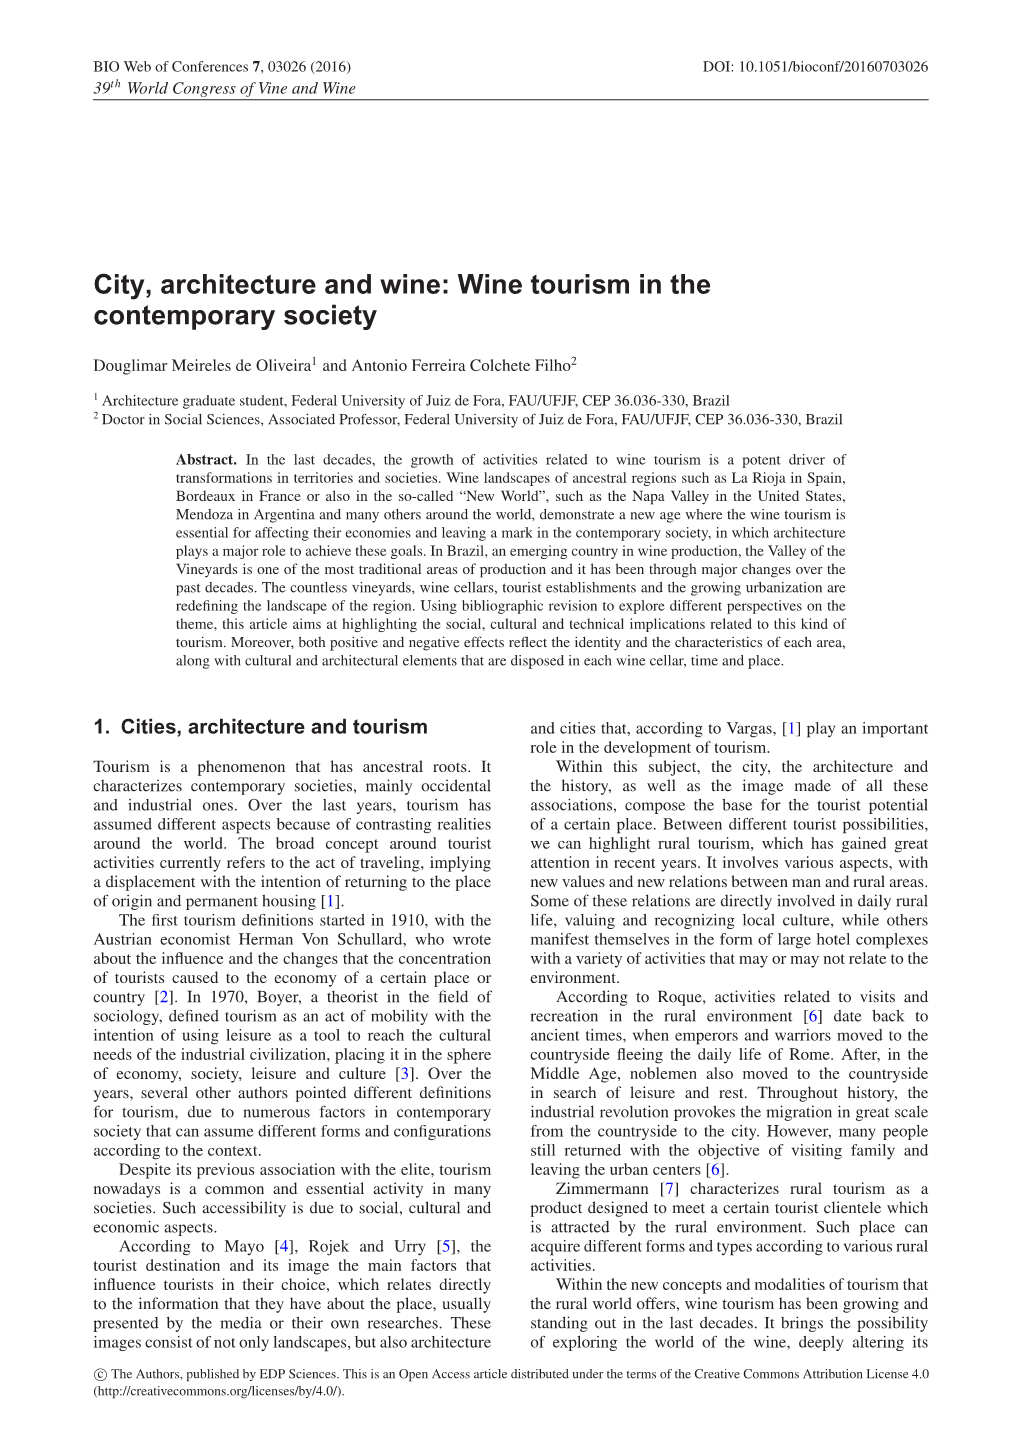 City, Architecture and Wine: Wine Tourism in the Contemporary Society